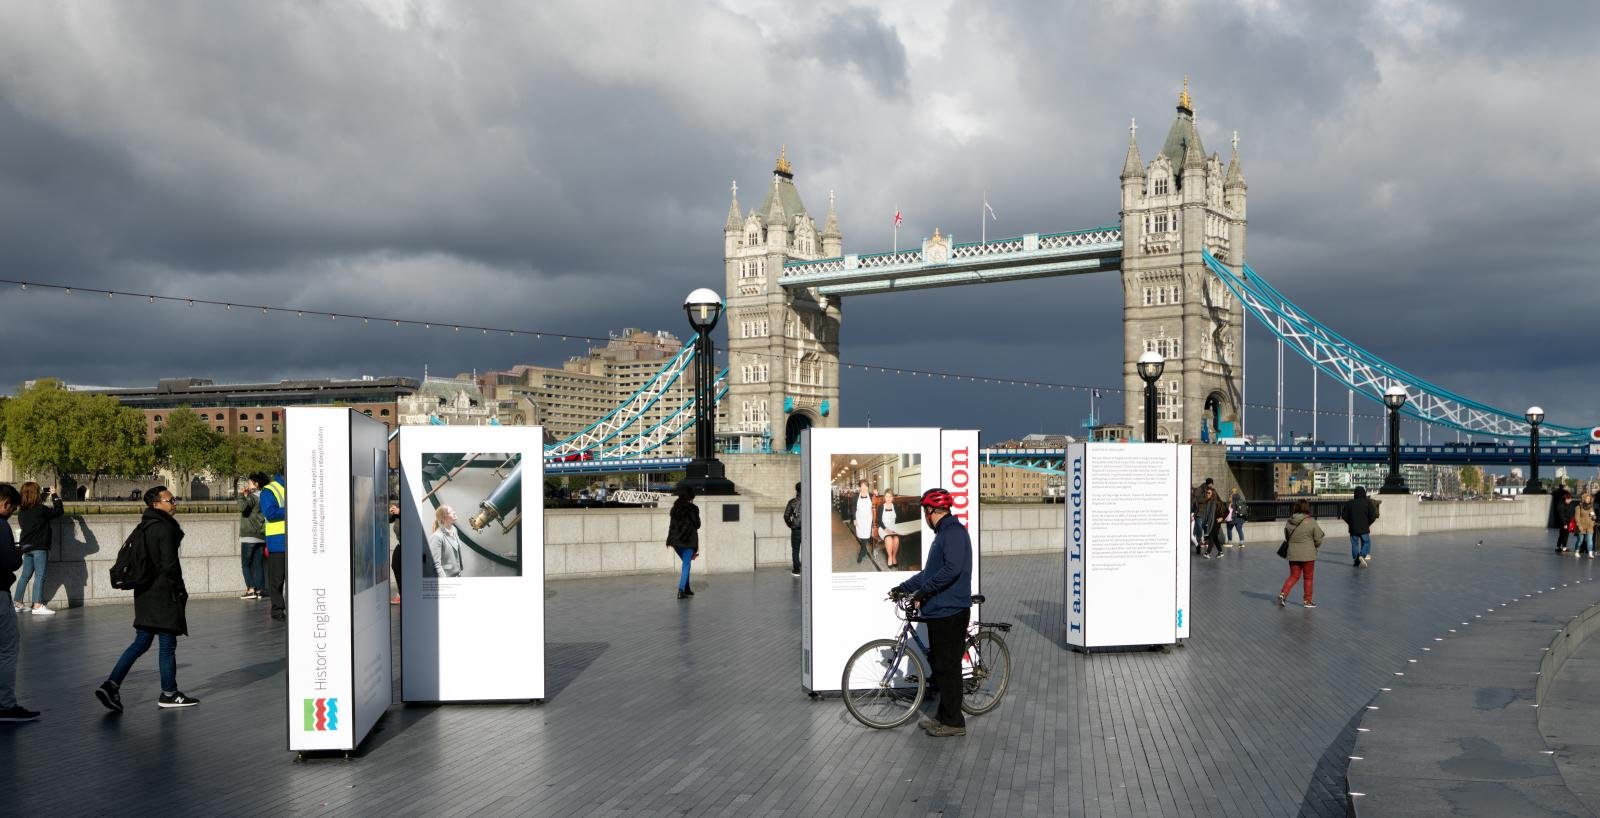 Tower Bridge, London with pedestrians and cyclists in the foreground stopping to look at Historic England's I am London exhibition panels in a pedestrianised area on the south bank.